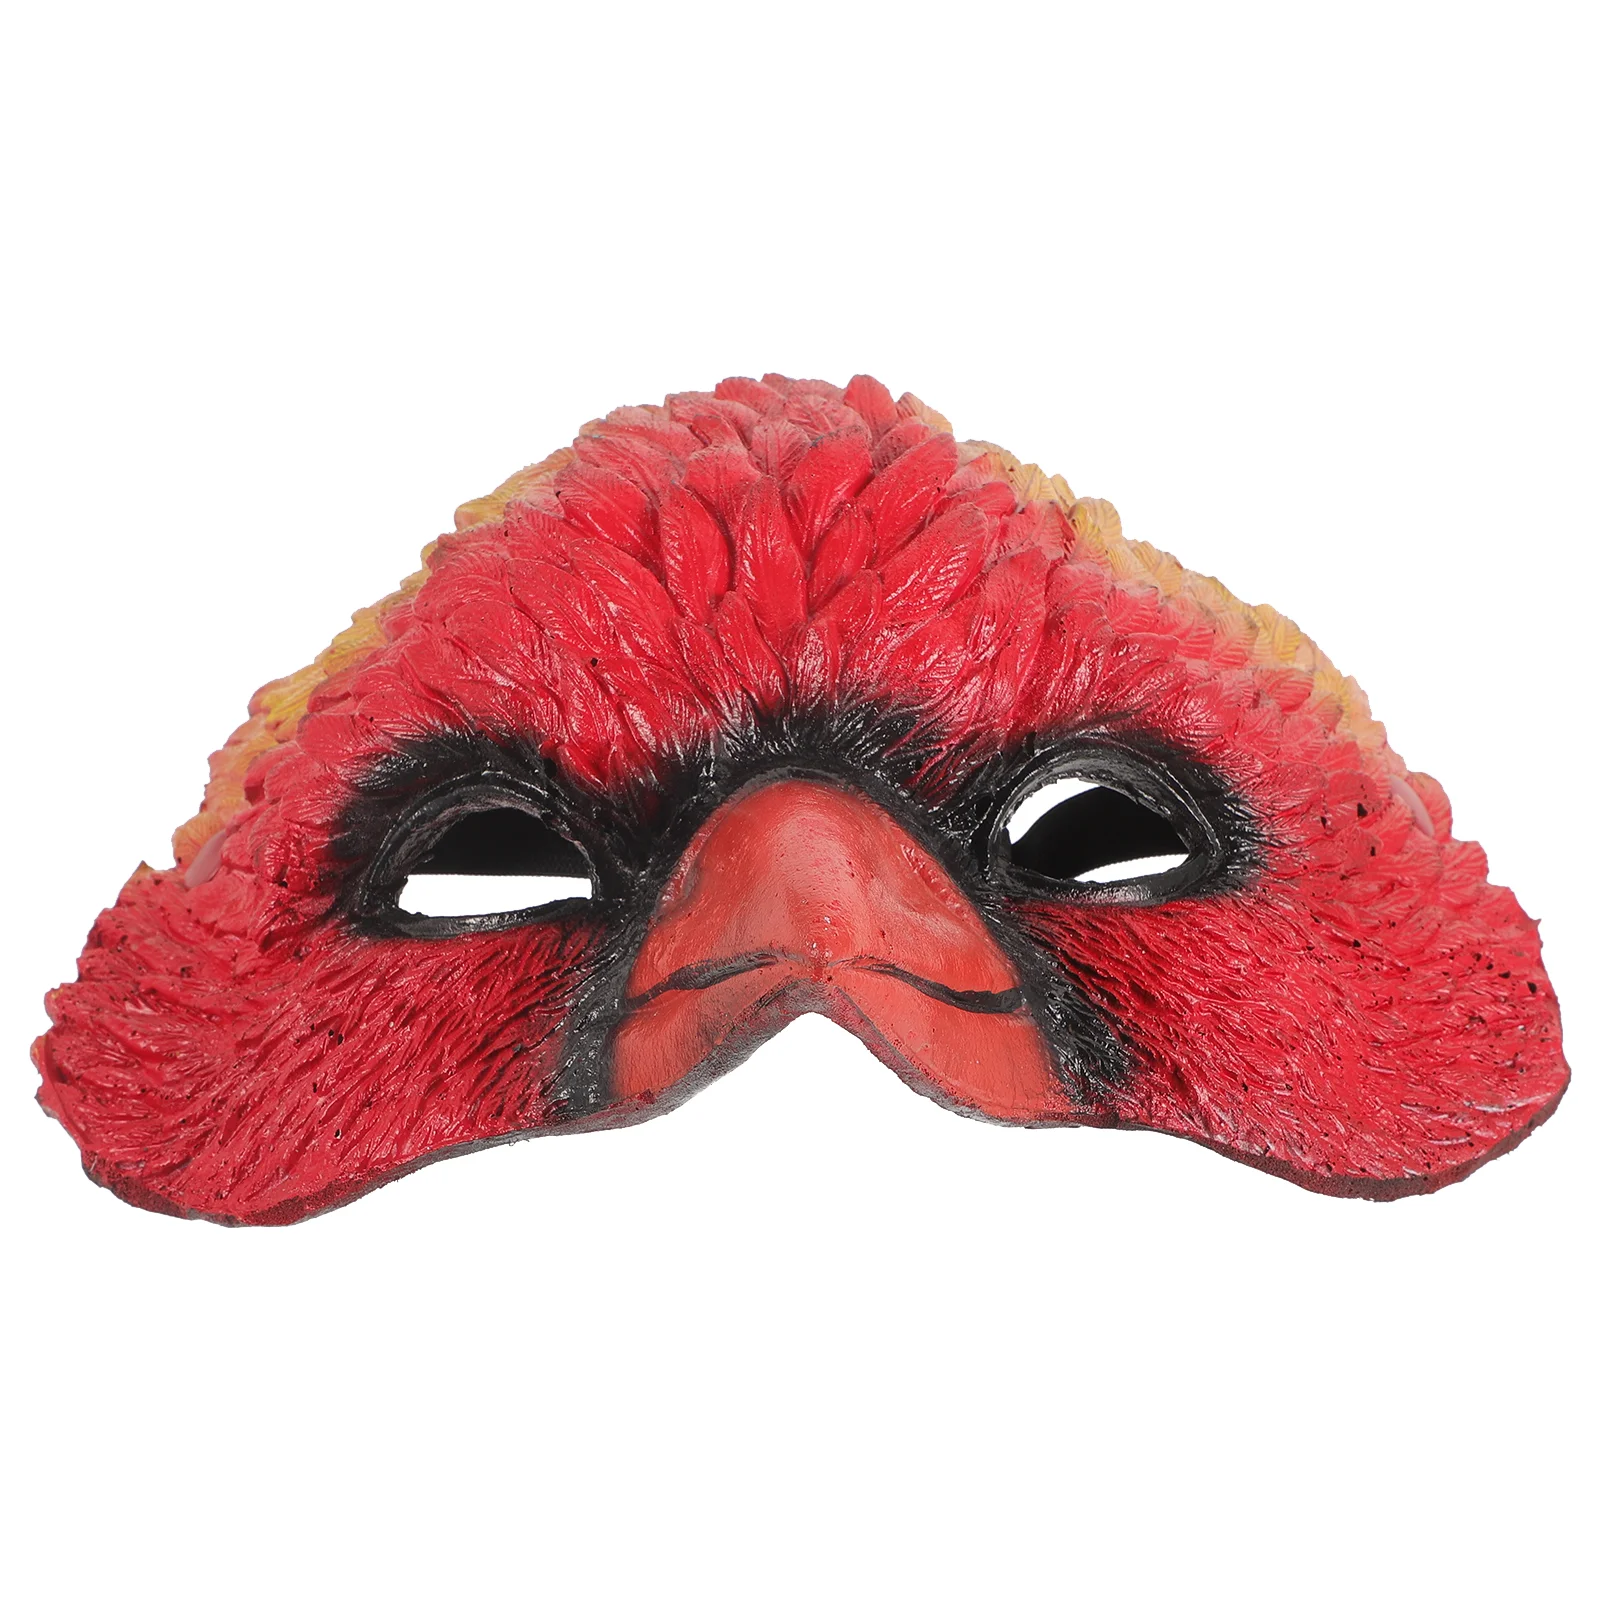 Bird Head Mask Role Play Outfits Make up Face Animal Masks for Party Pu Foam Cosplay Costume adult s goddess costume ladies cosplay outfits role play roman fancy dress elegant princess costumes